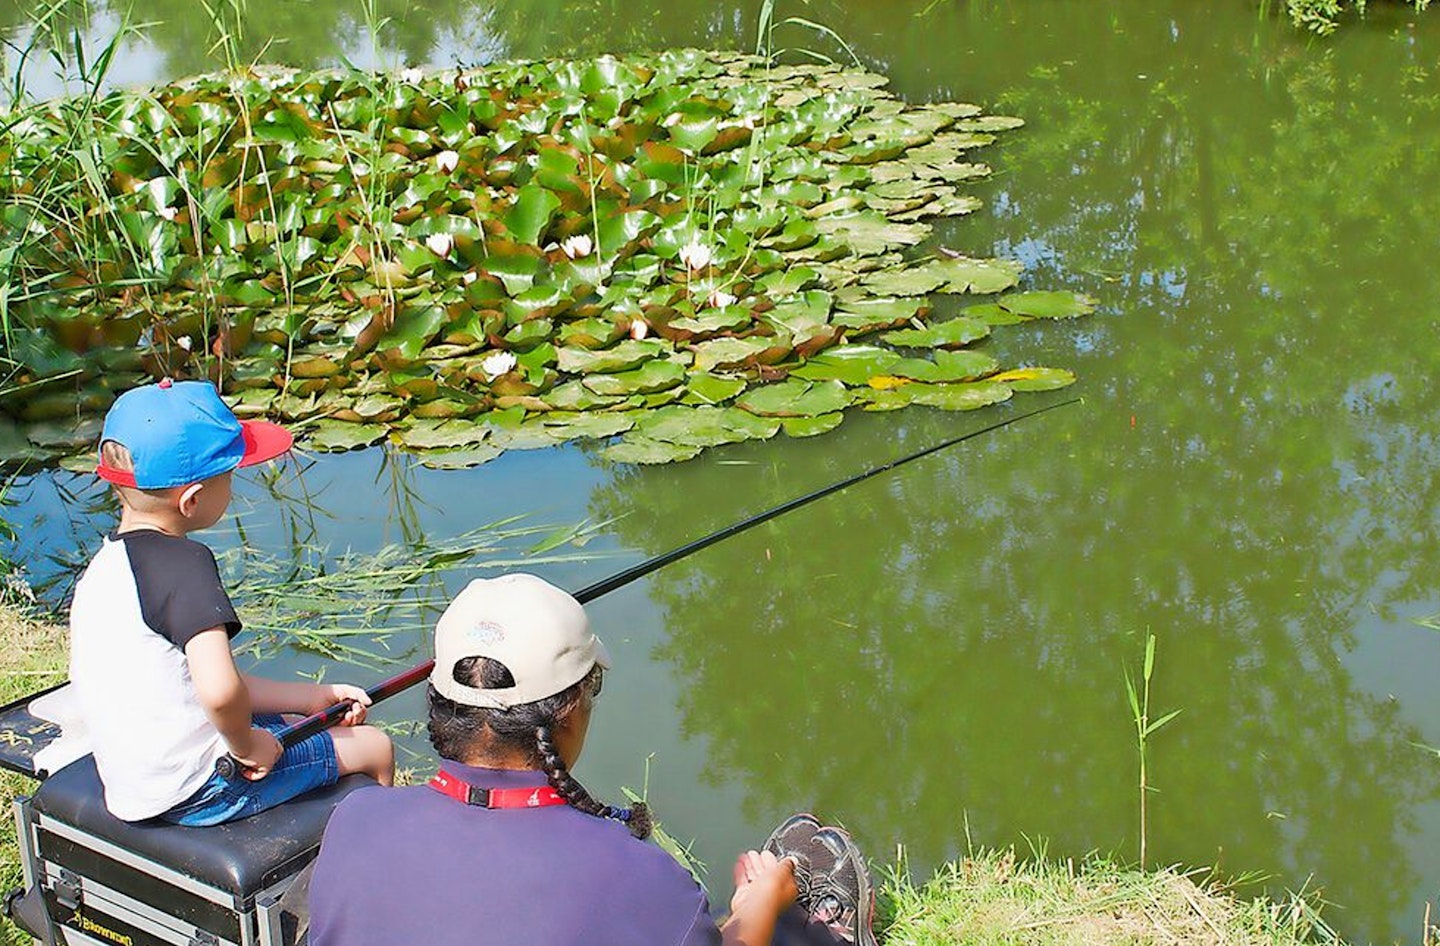 Pick a lake that’s simple to fish if you’re taking kids